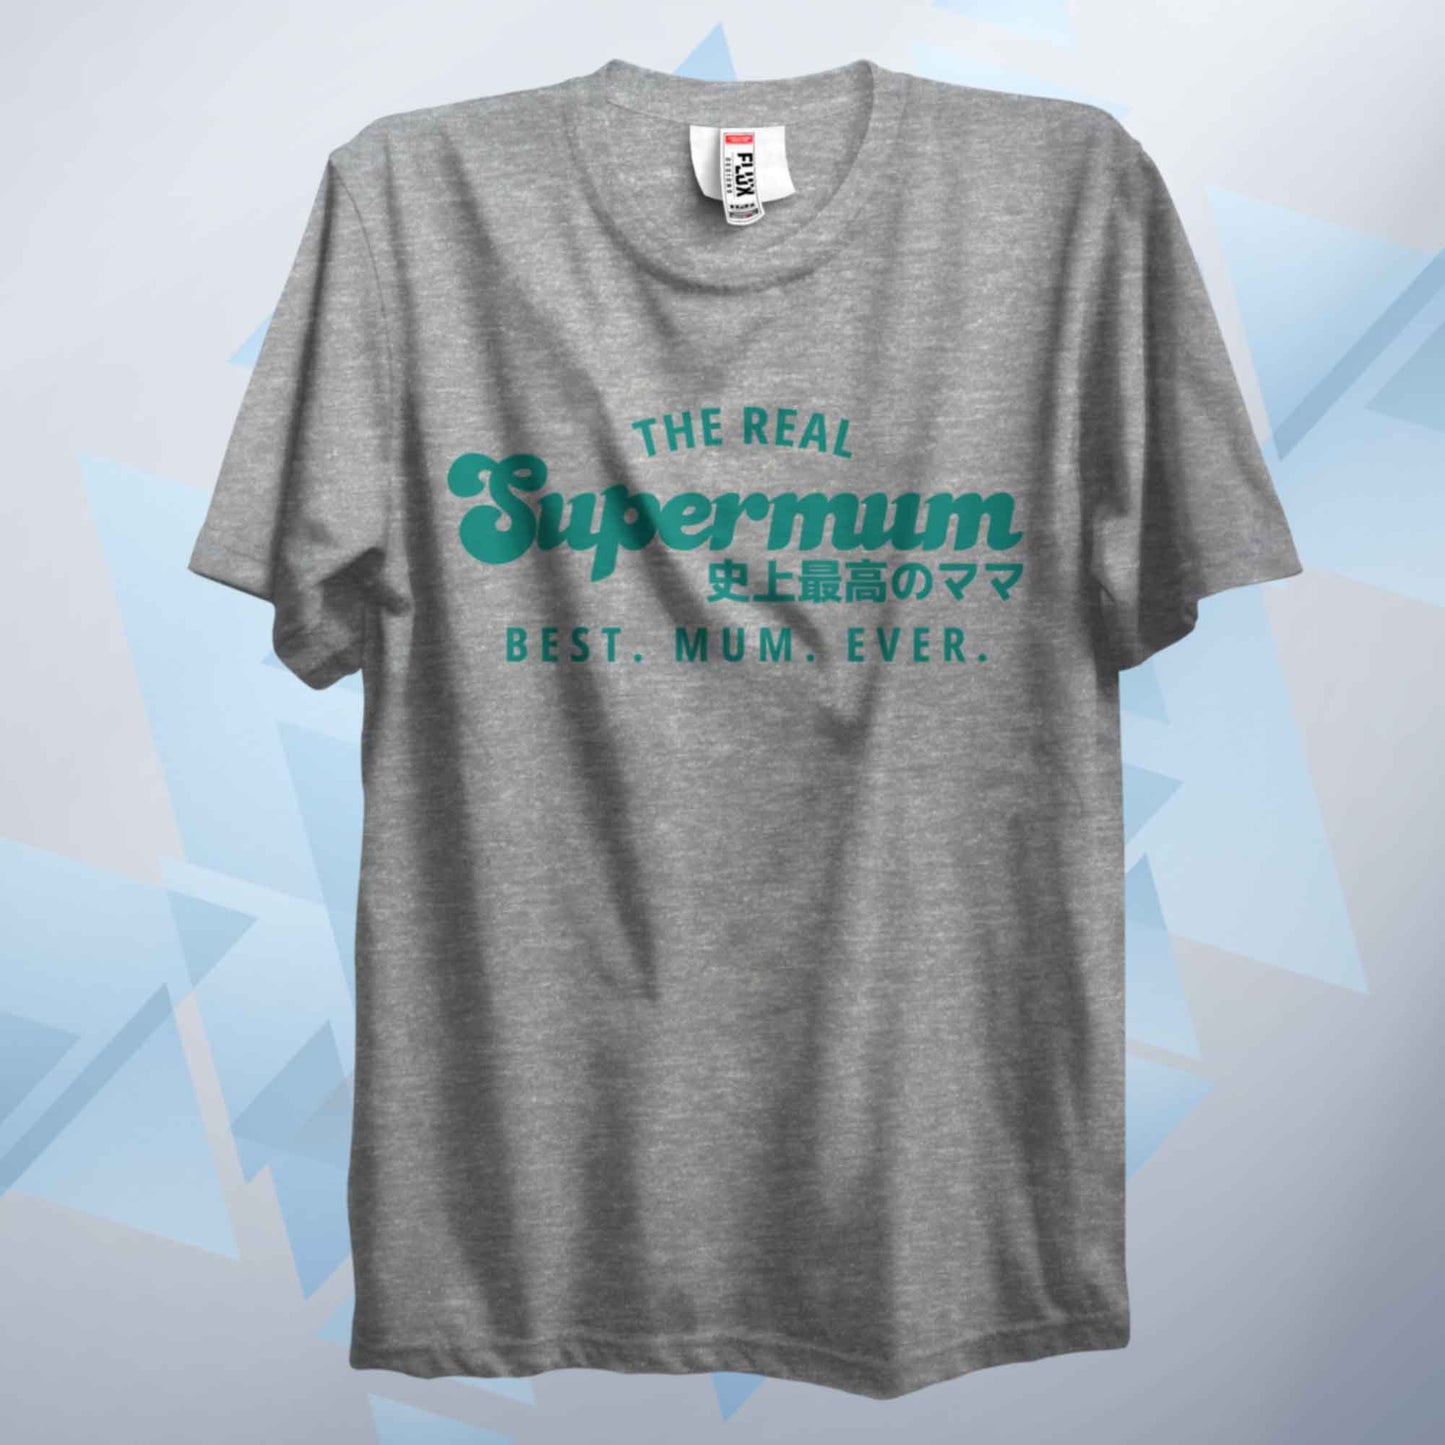 The Real Supermum Green T Shirt